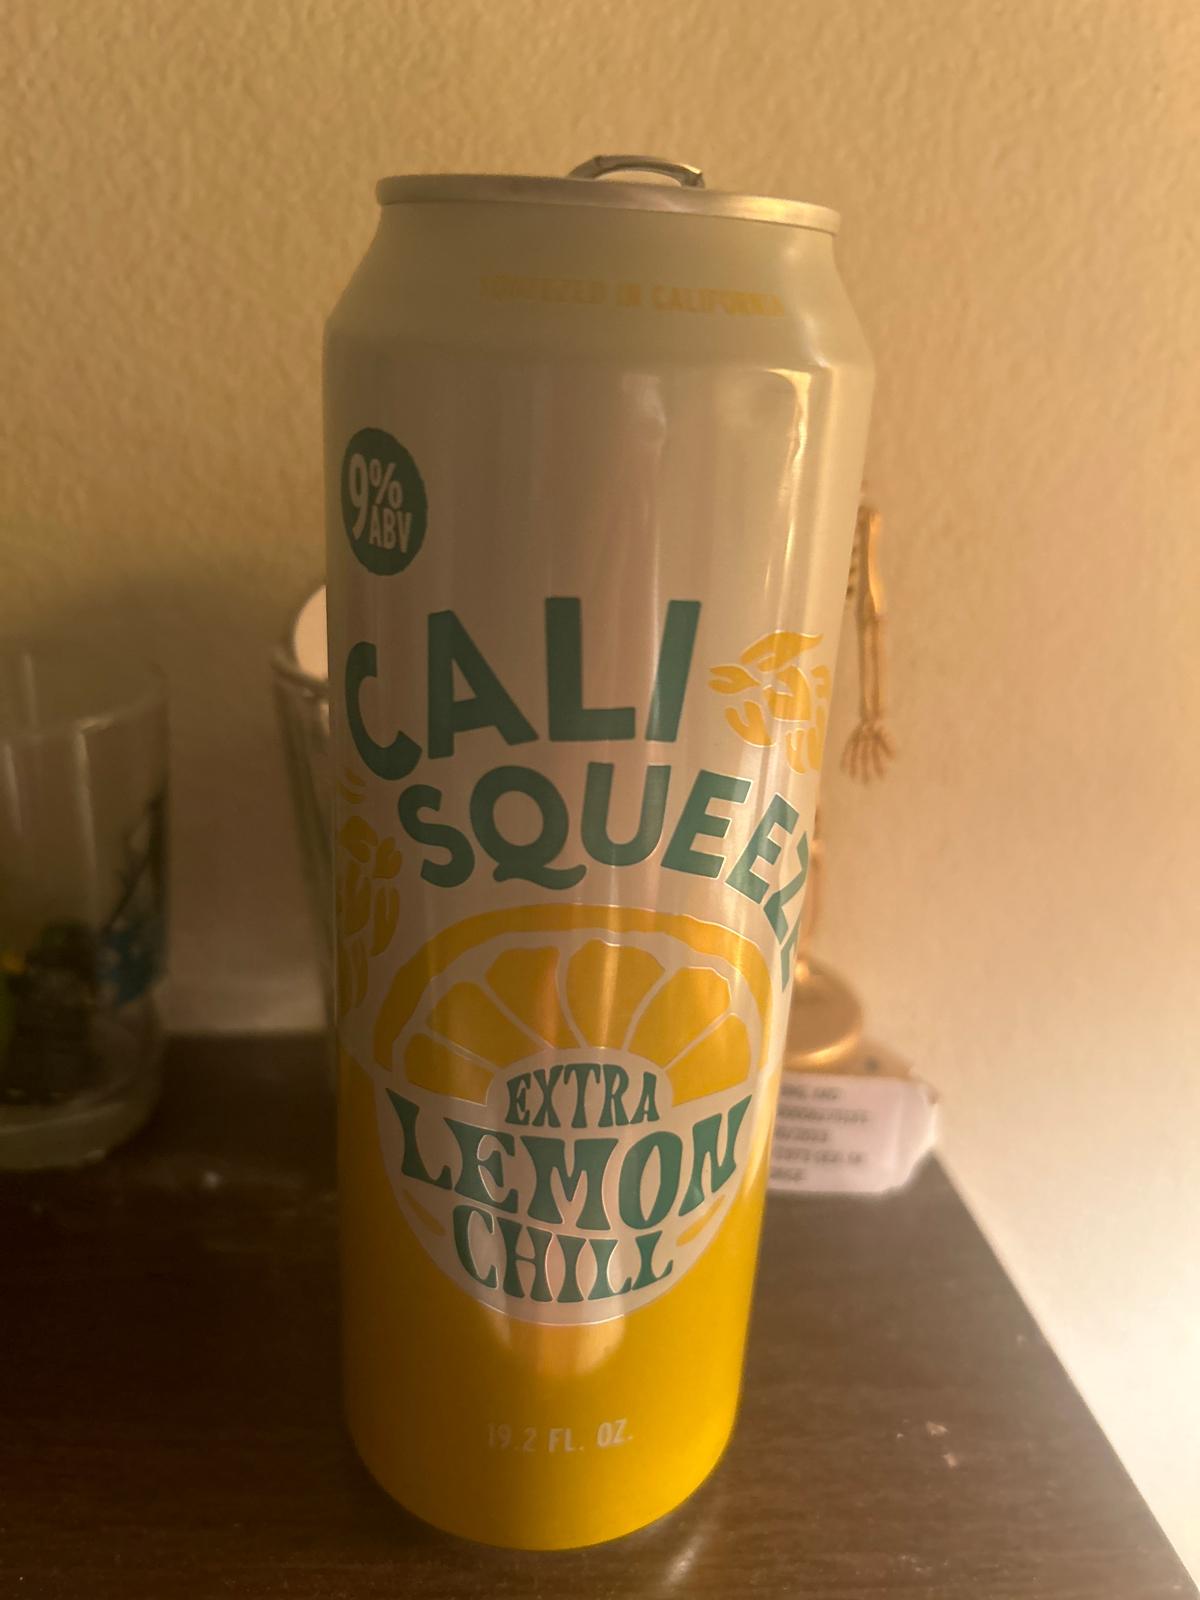 Cali Squeeze Extra Lemon Chill